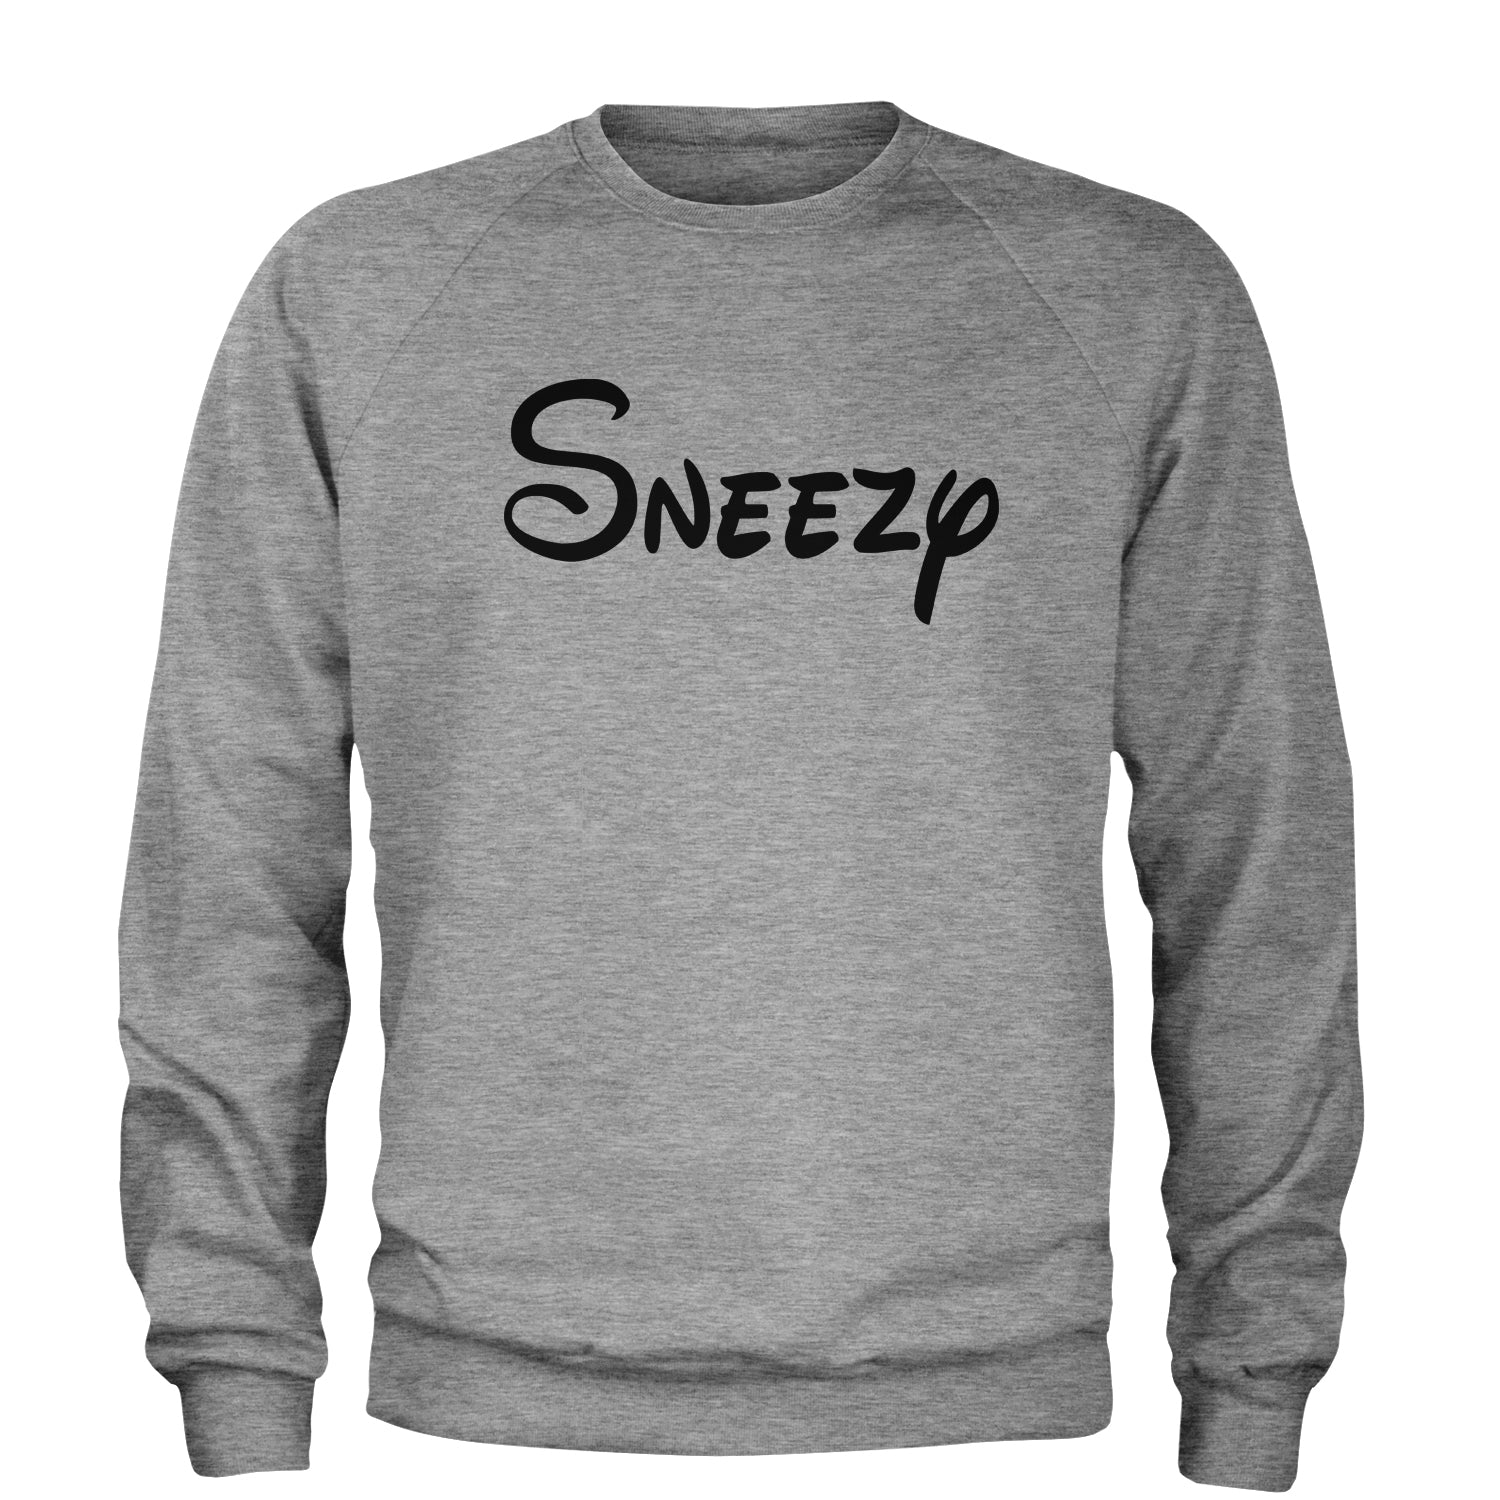 Sneezy - 7 Dwarfs Costume Adult Crewneck Sweatshirt and, costume, dwarfs, group, halloween, matching, seven, snow, the, white by Expression Tees